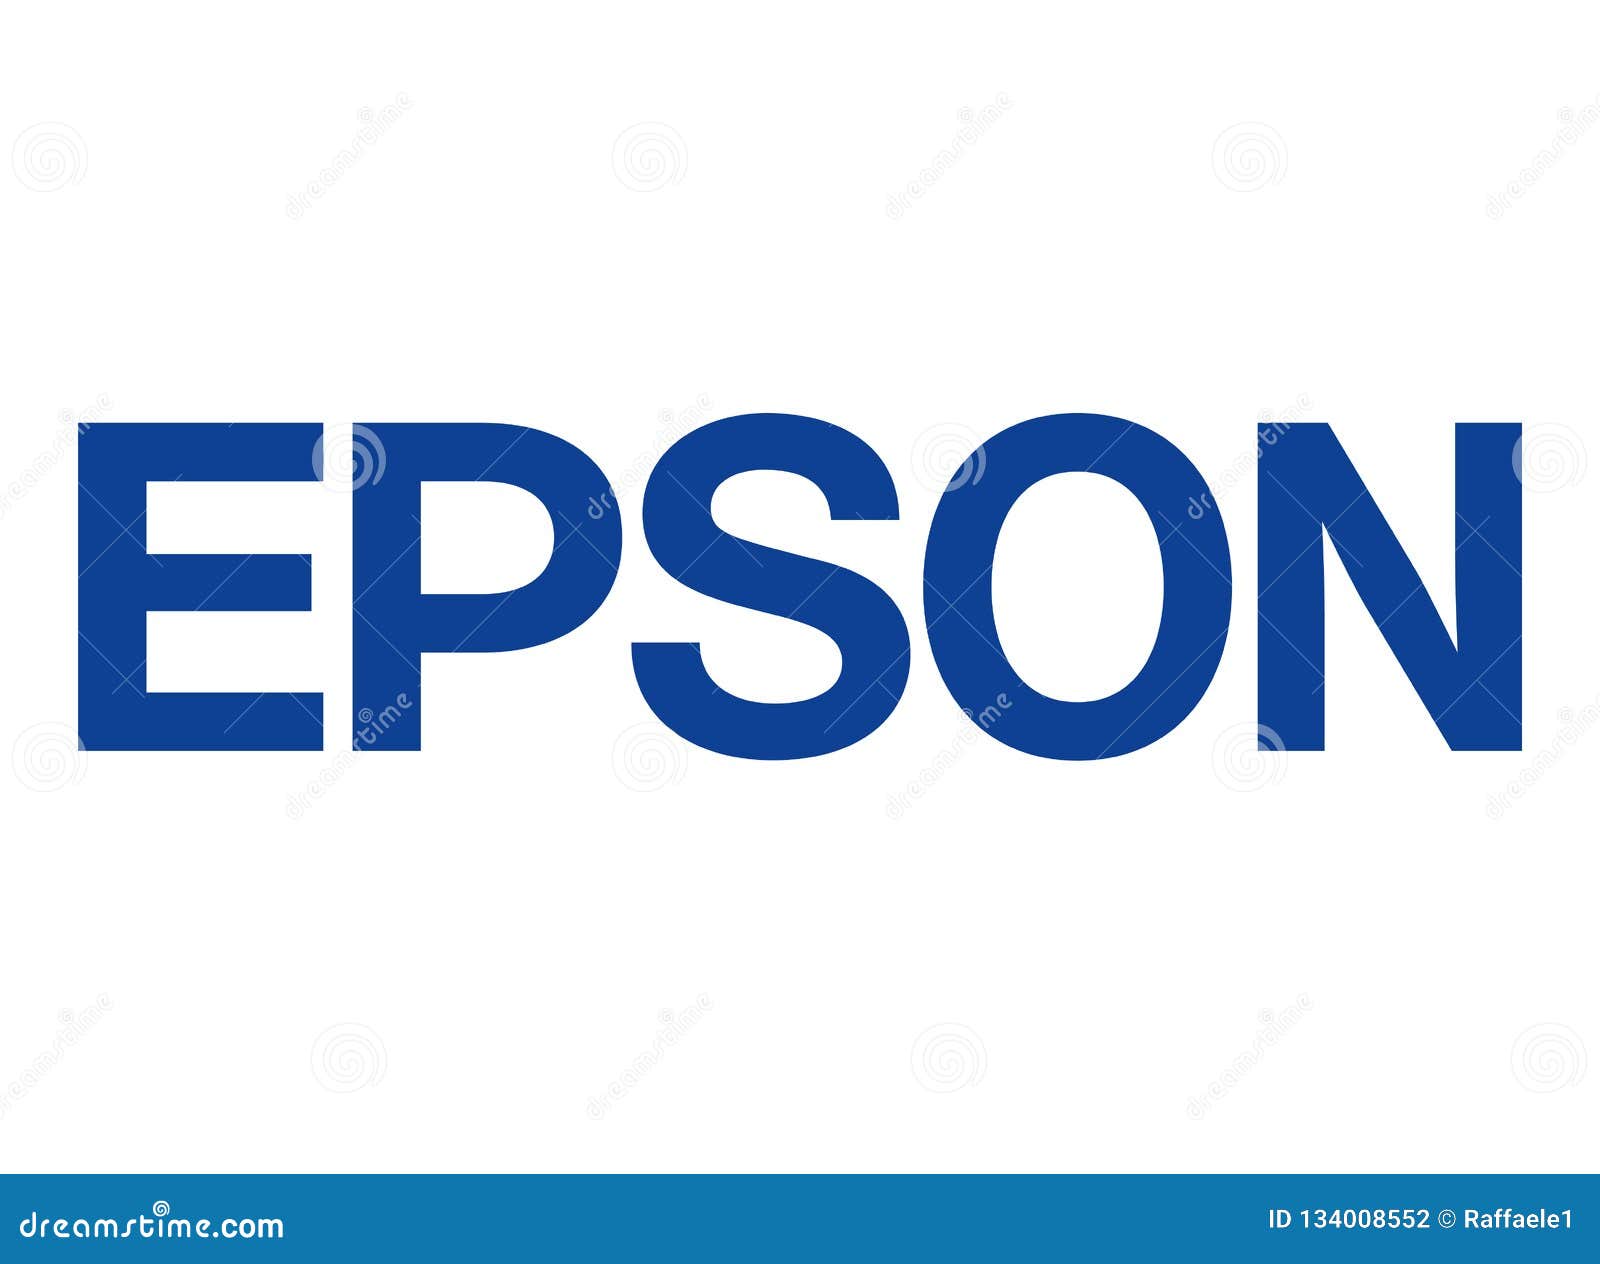 Epson Easy Interactive Tools | Overview - YouTube